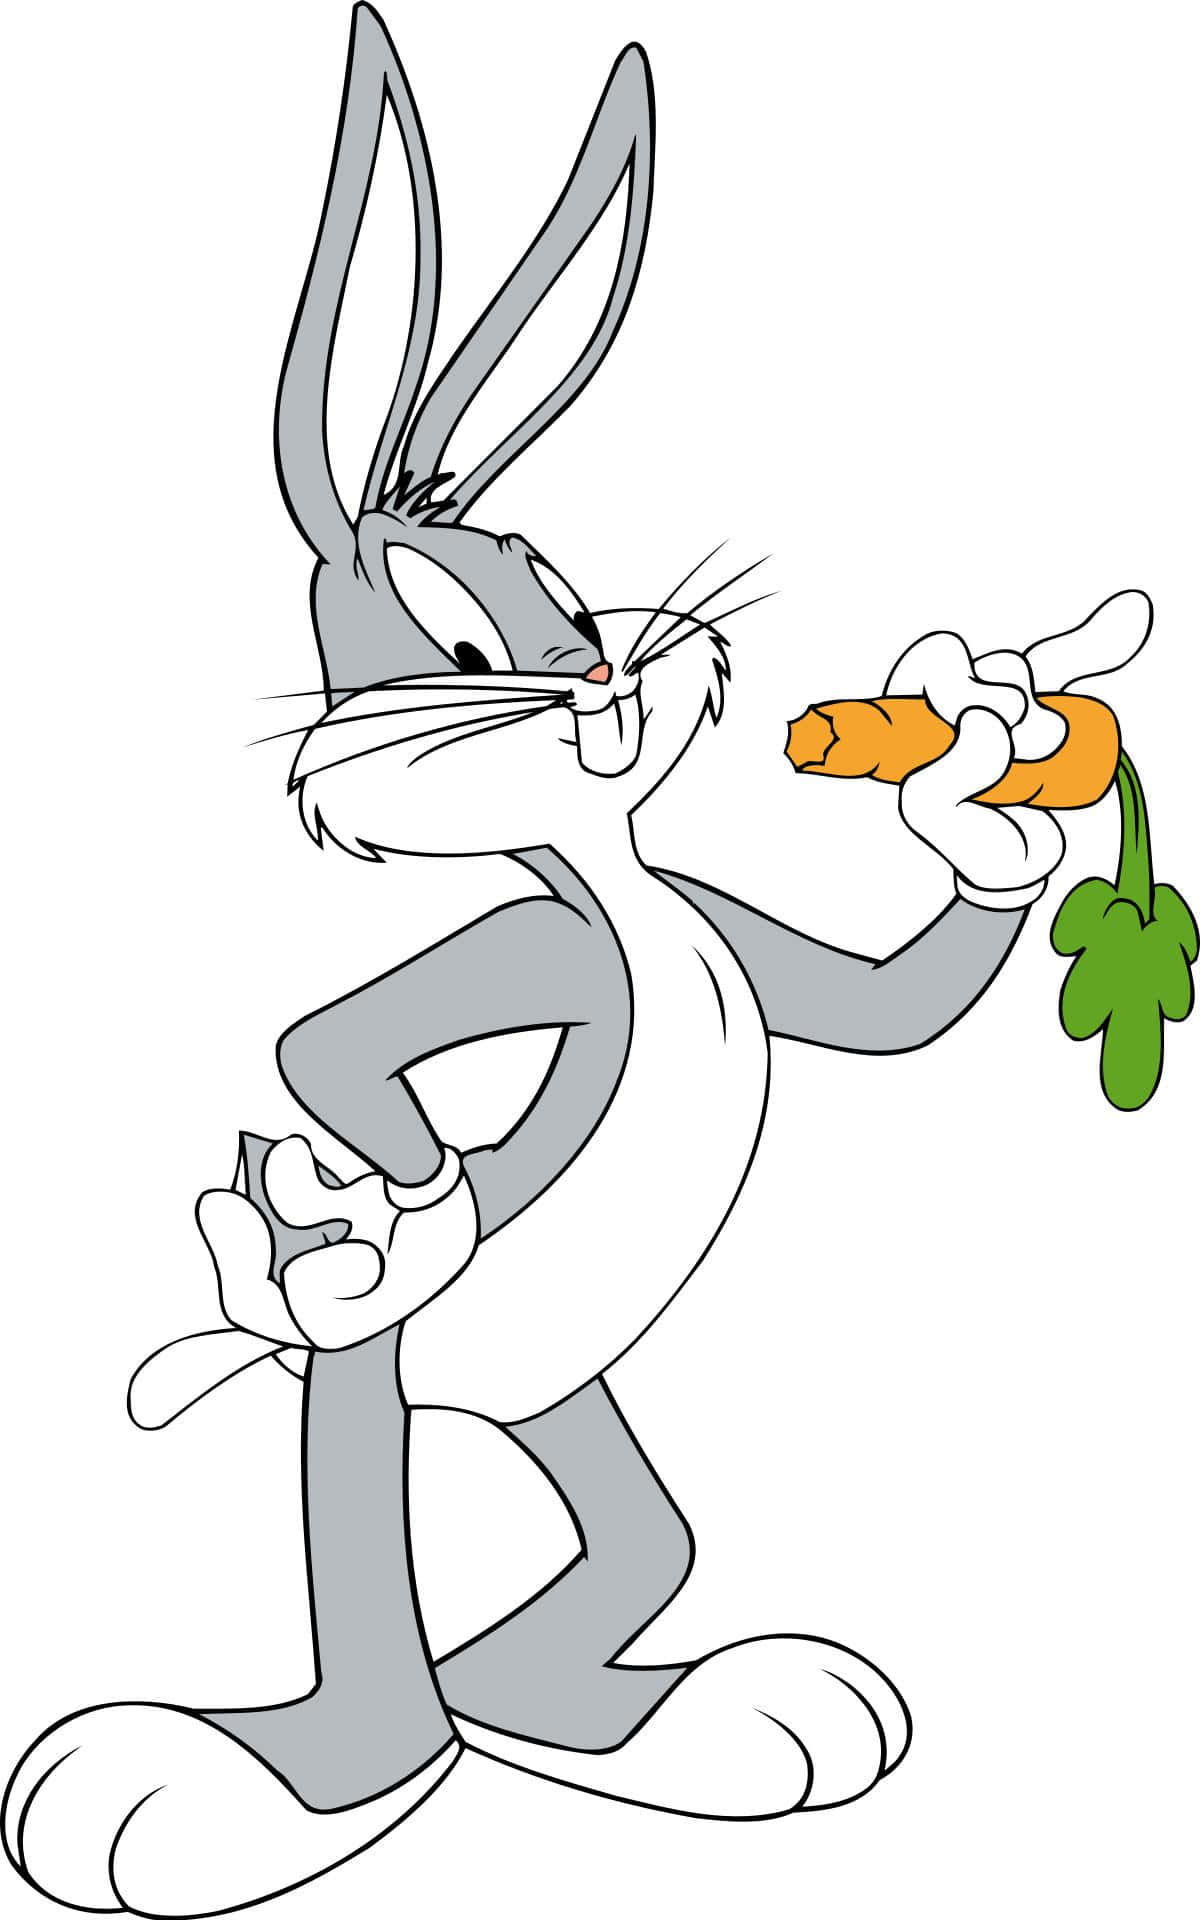 Bugs Bunny ready to make some mischief!